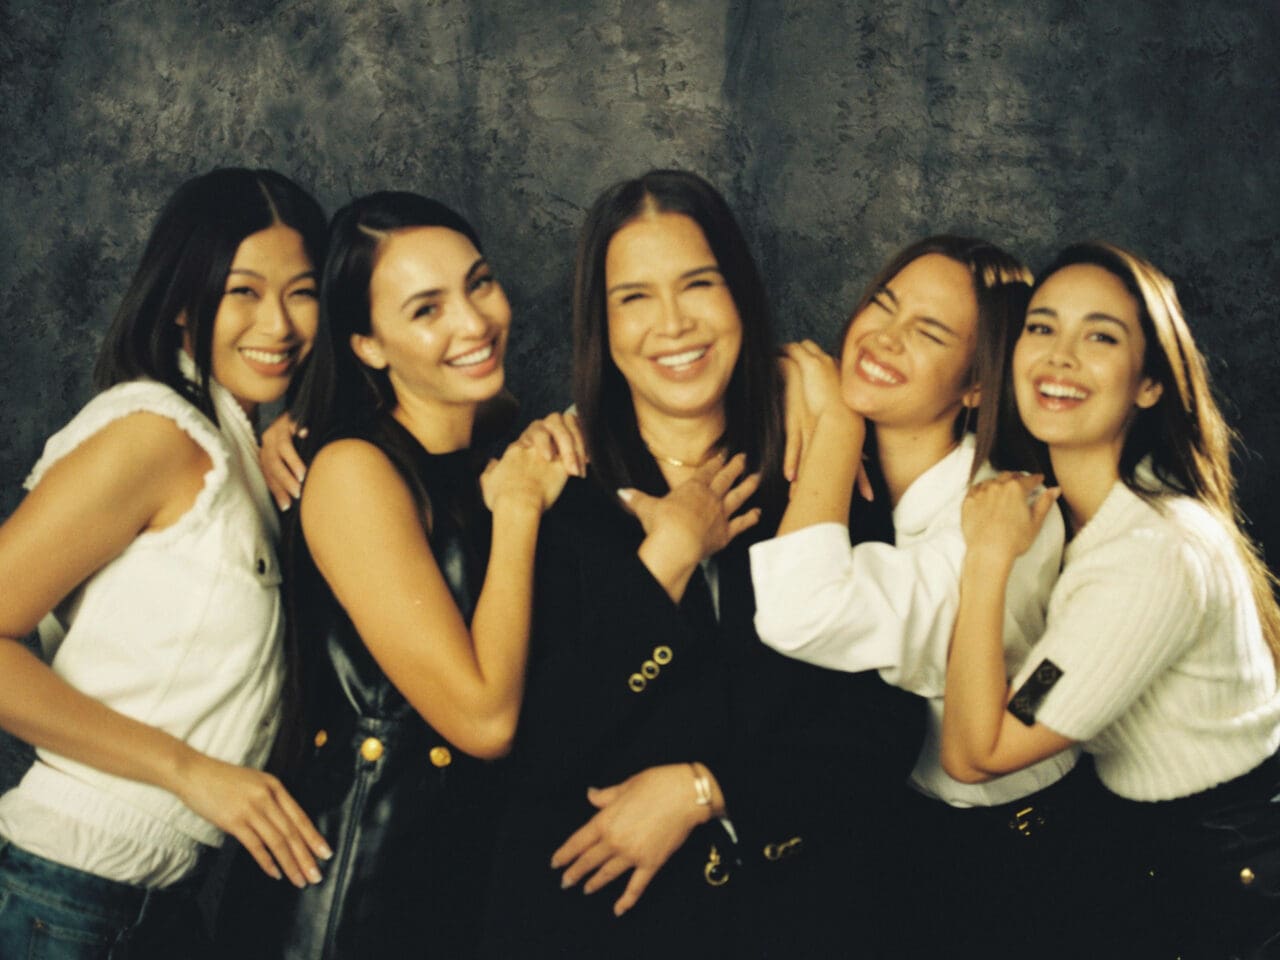 Megan Young, Melanie Marquez, Catriona Gray, R'Bonney Gabriel, and Michelle Dee laughing and smiling